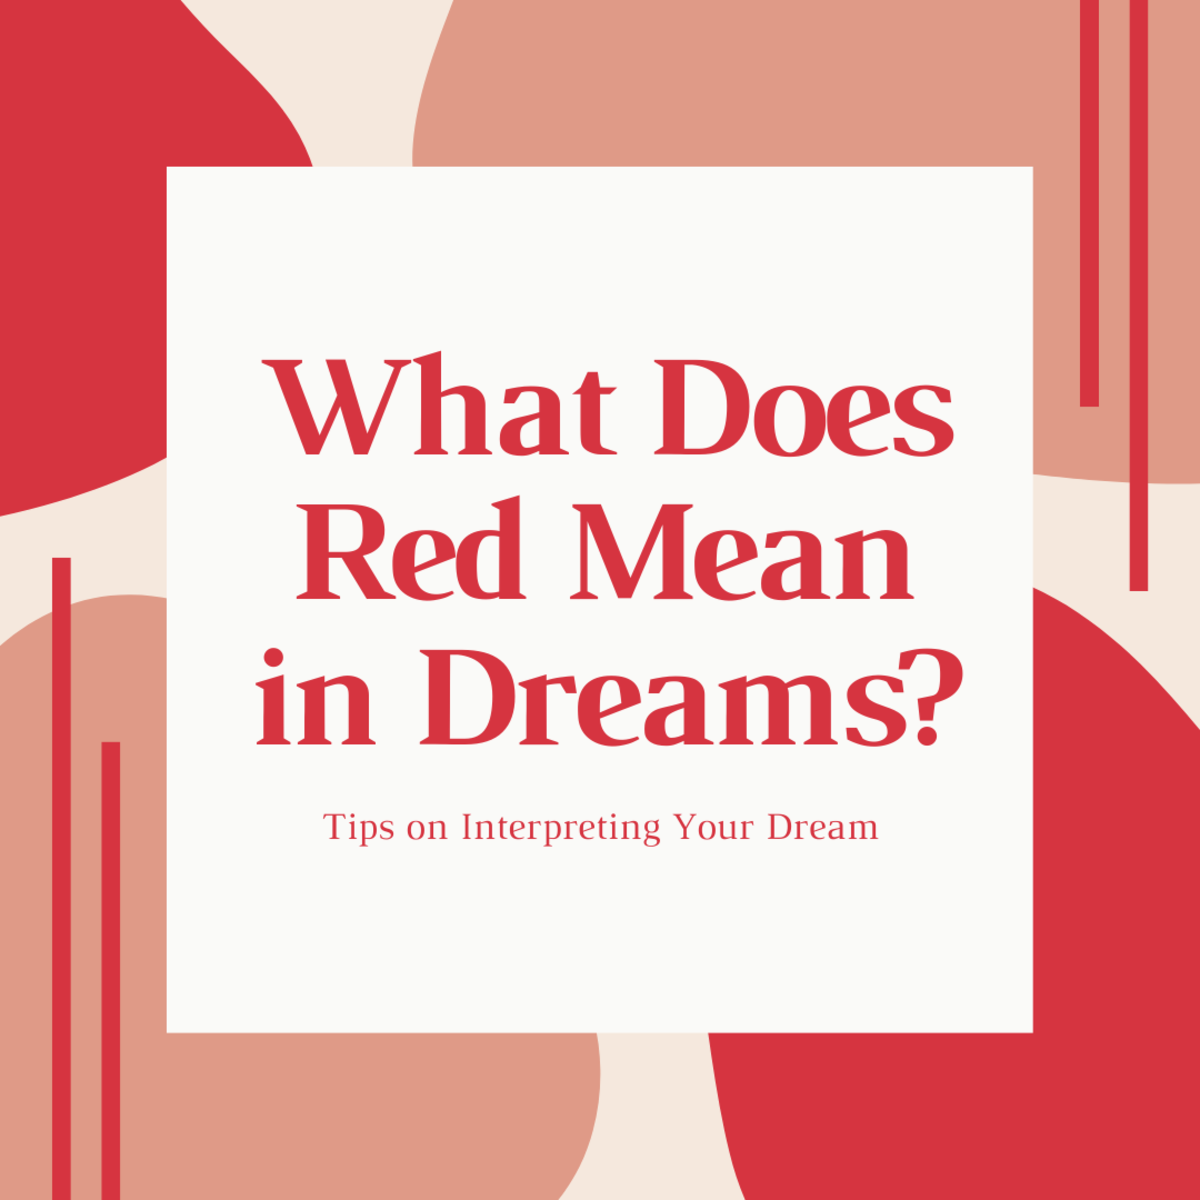 Dreams Of Red Dress And Emotions